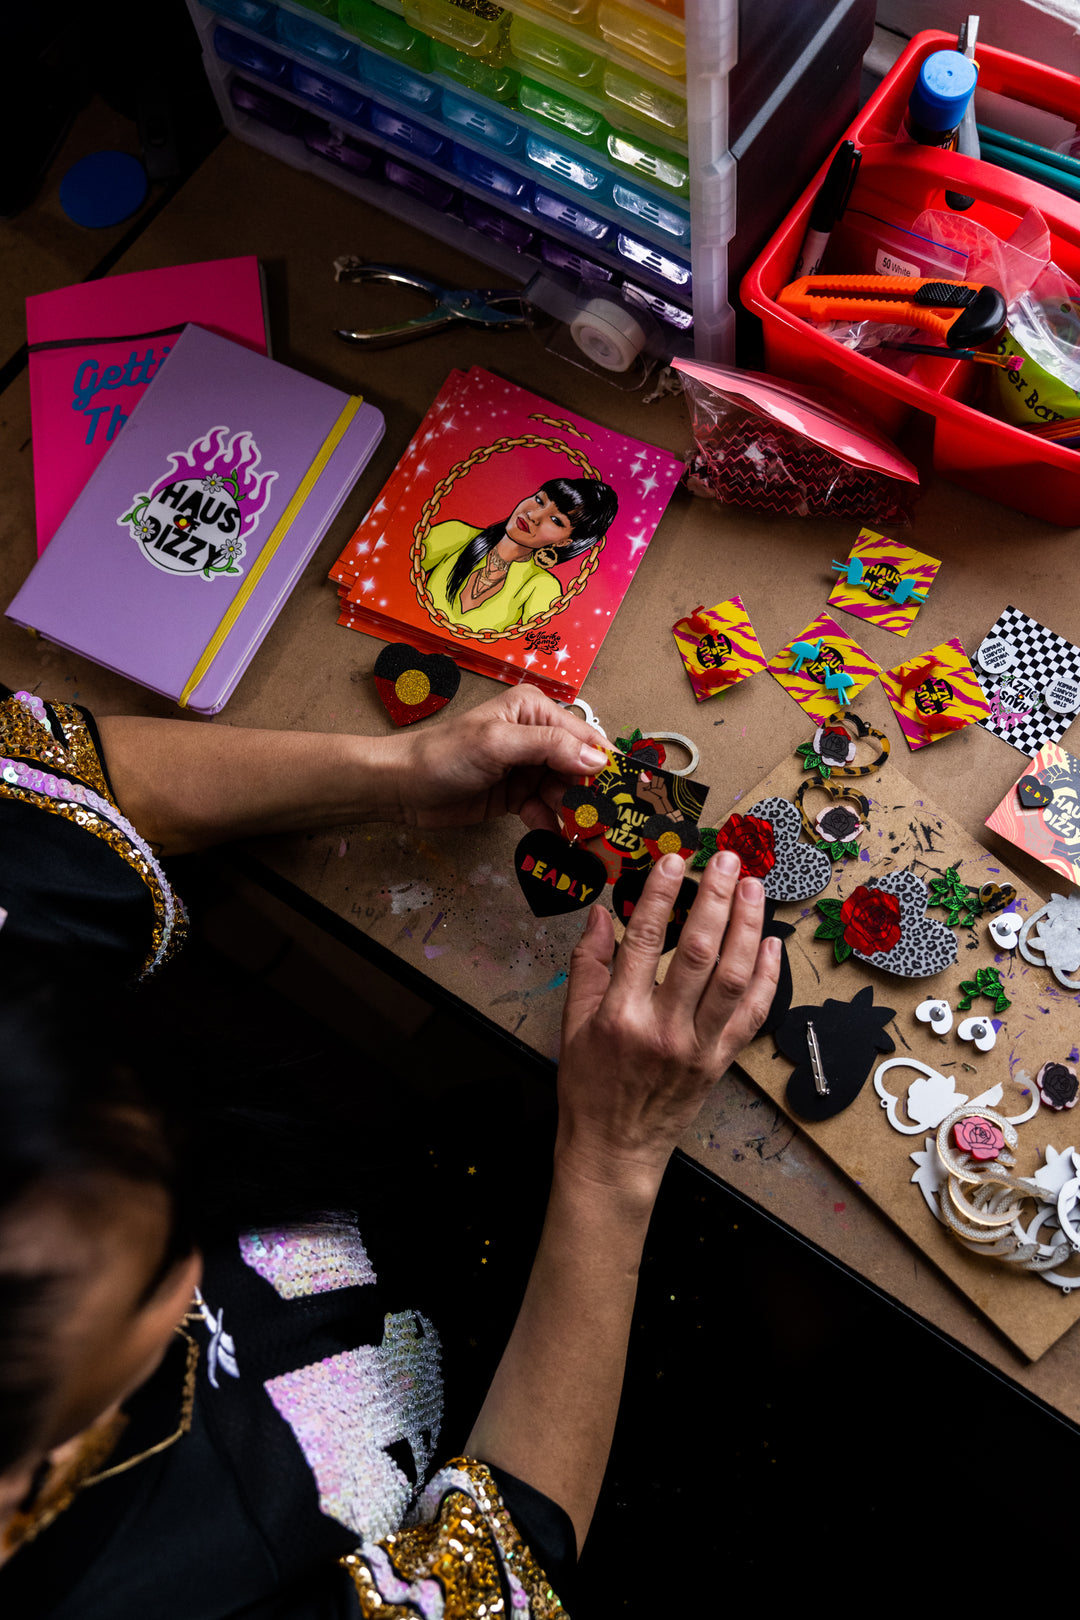 A photo of a proud Wiradjuri woman in her jewellery making studio. The image is focused on her hands making black heart acrylic earrings that say "Deadly" with an Aboriginal Flag circle stud top. Other earrings and pins are placed across the desk she is working on.